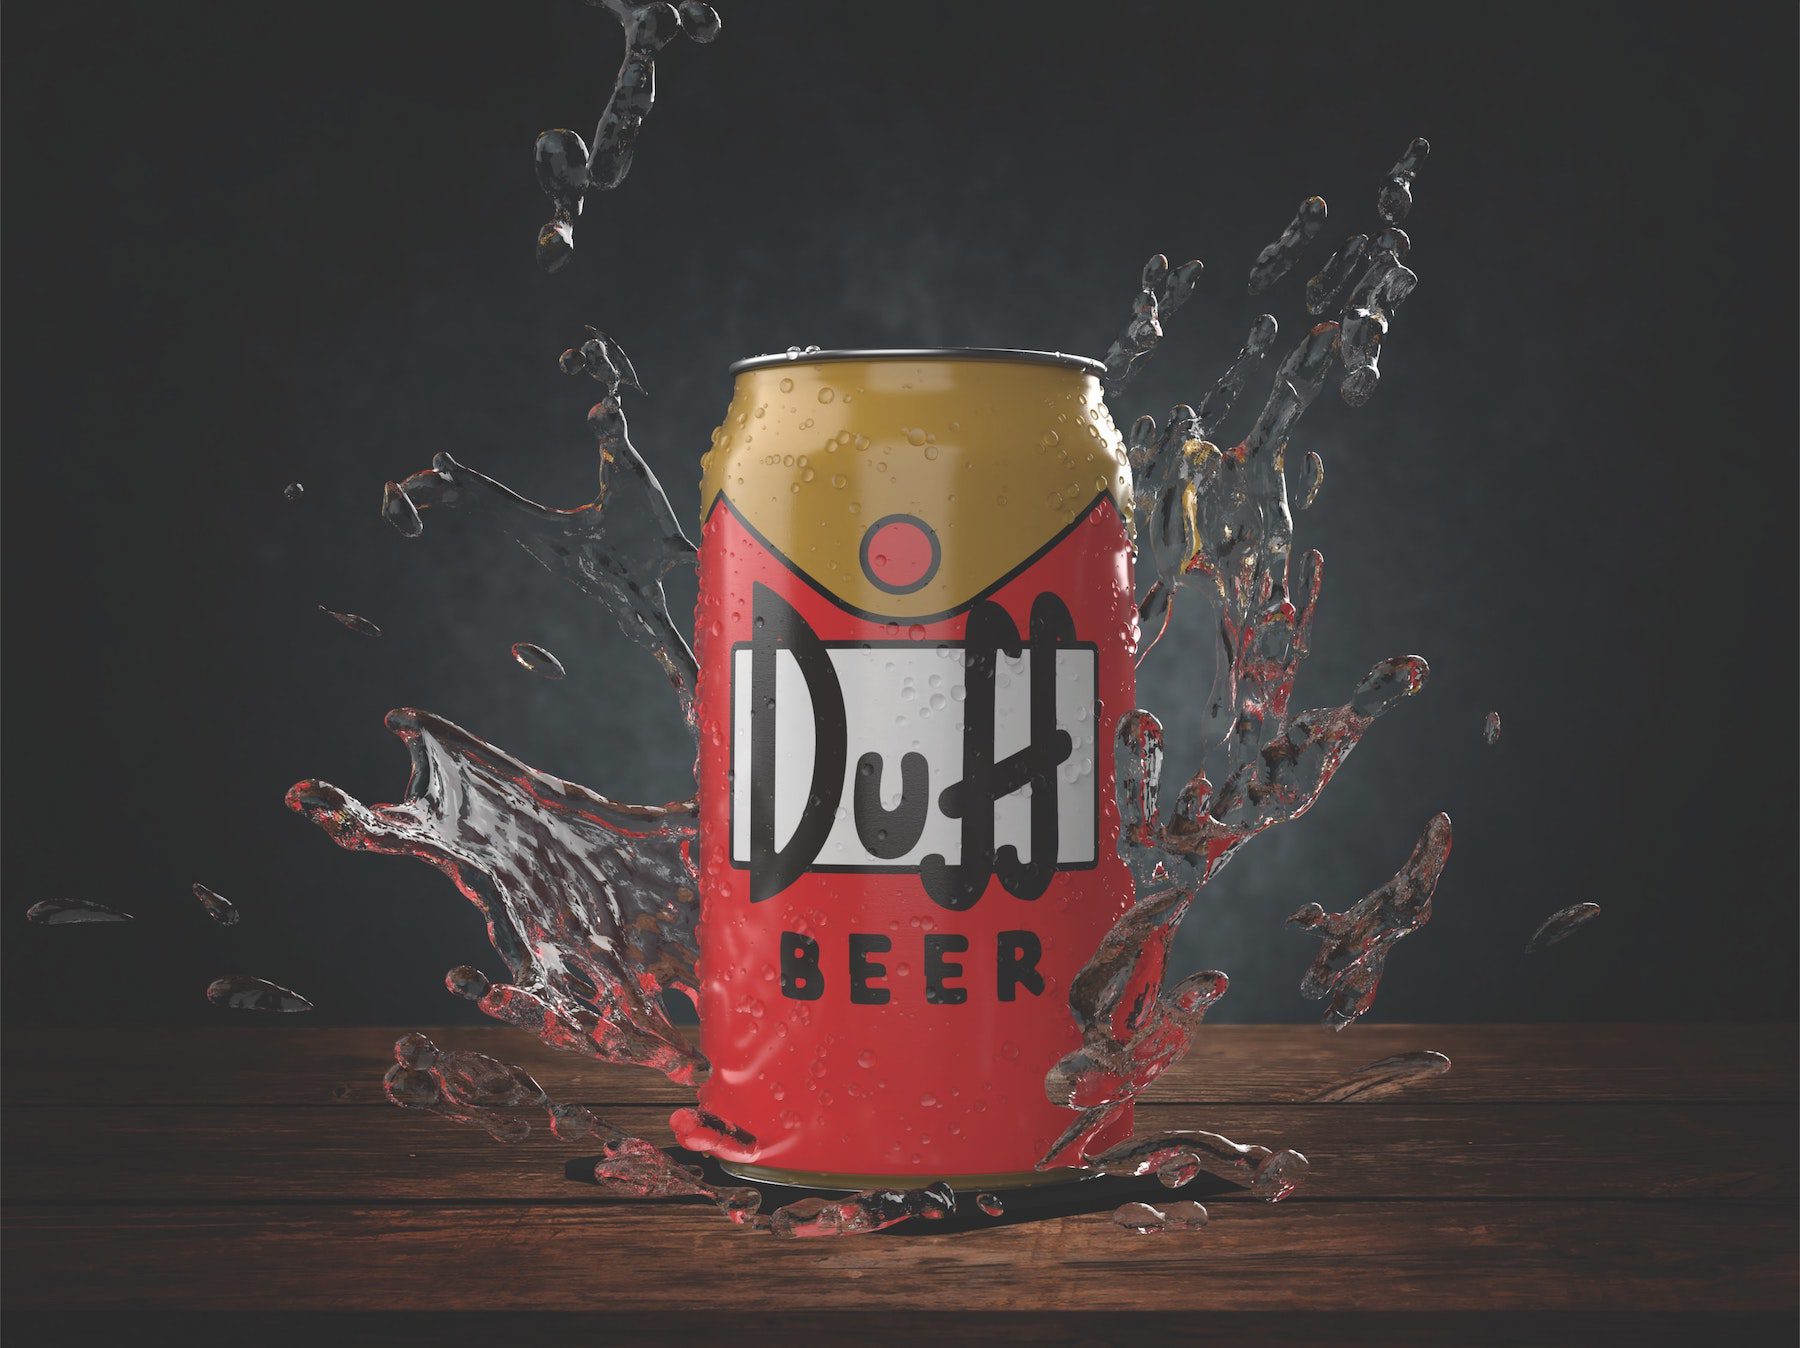 Photography of Duff Beer can energy drink splashing down into liquid on a wooden surface.